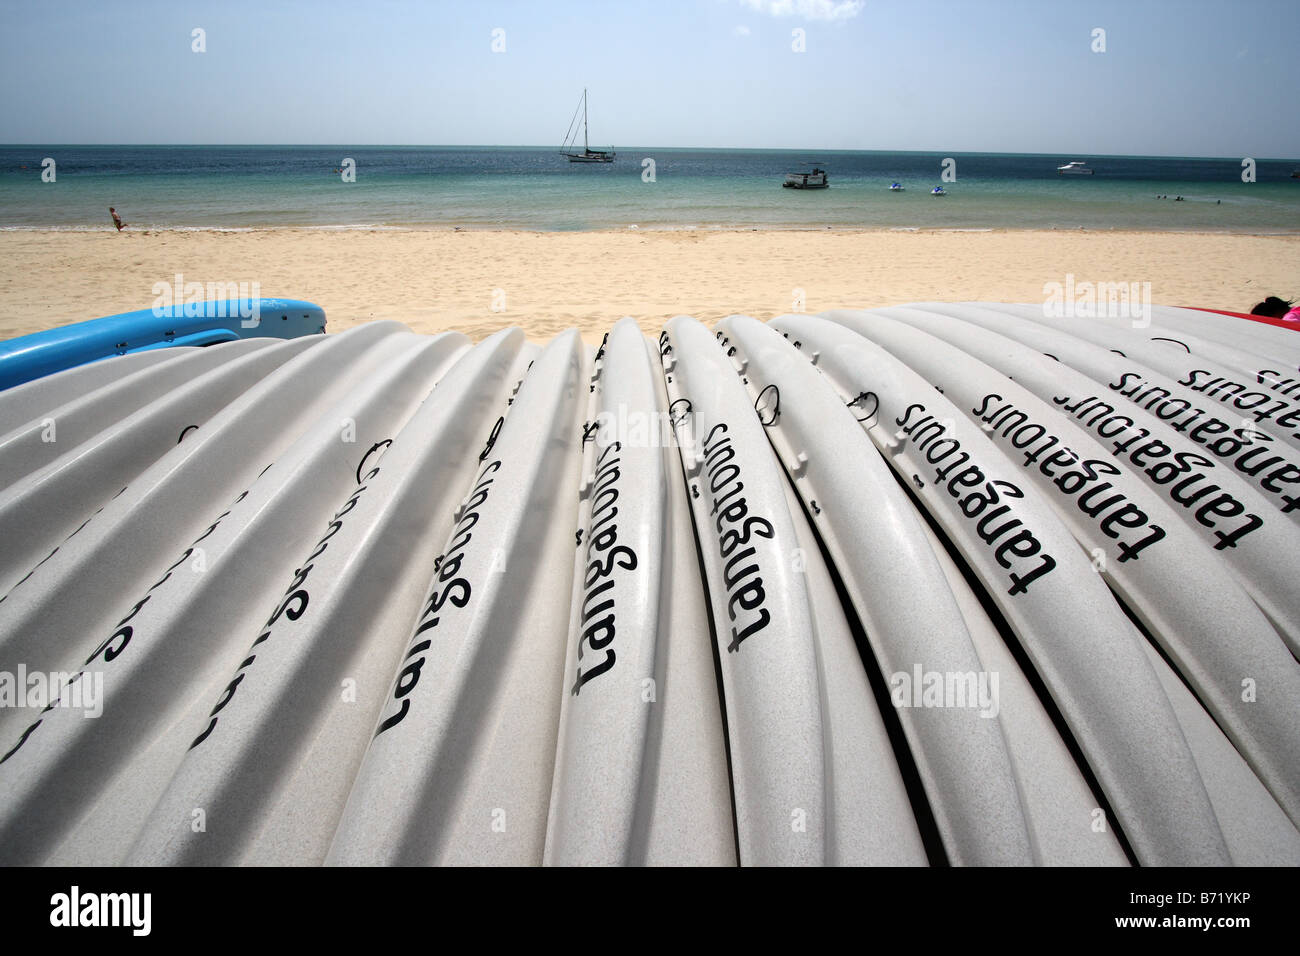 A ROW OF WHITE CANOES LINED UP ON A BEACH QUEENSLAND AUSTRALIA HORIZONTAL BDB11365 Stock Photo